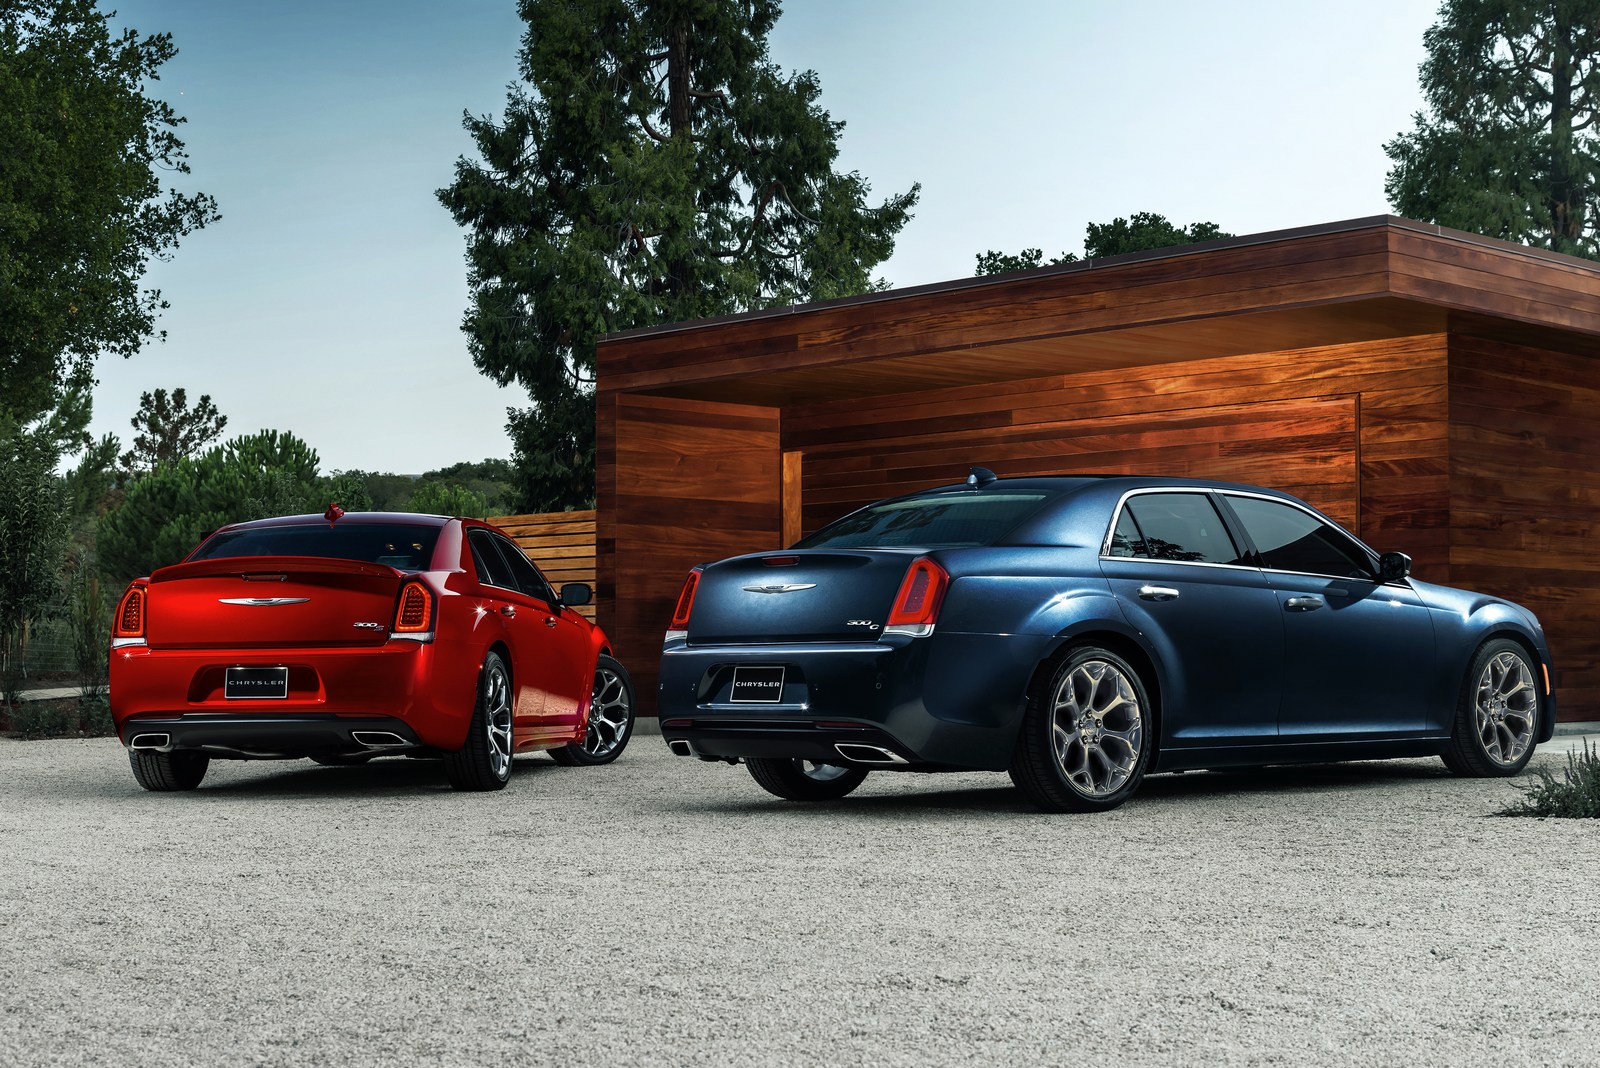 Consumer Reports Names The Chrysler 300 A Recommended Vehicle Following ...